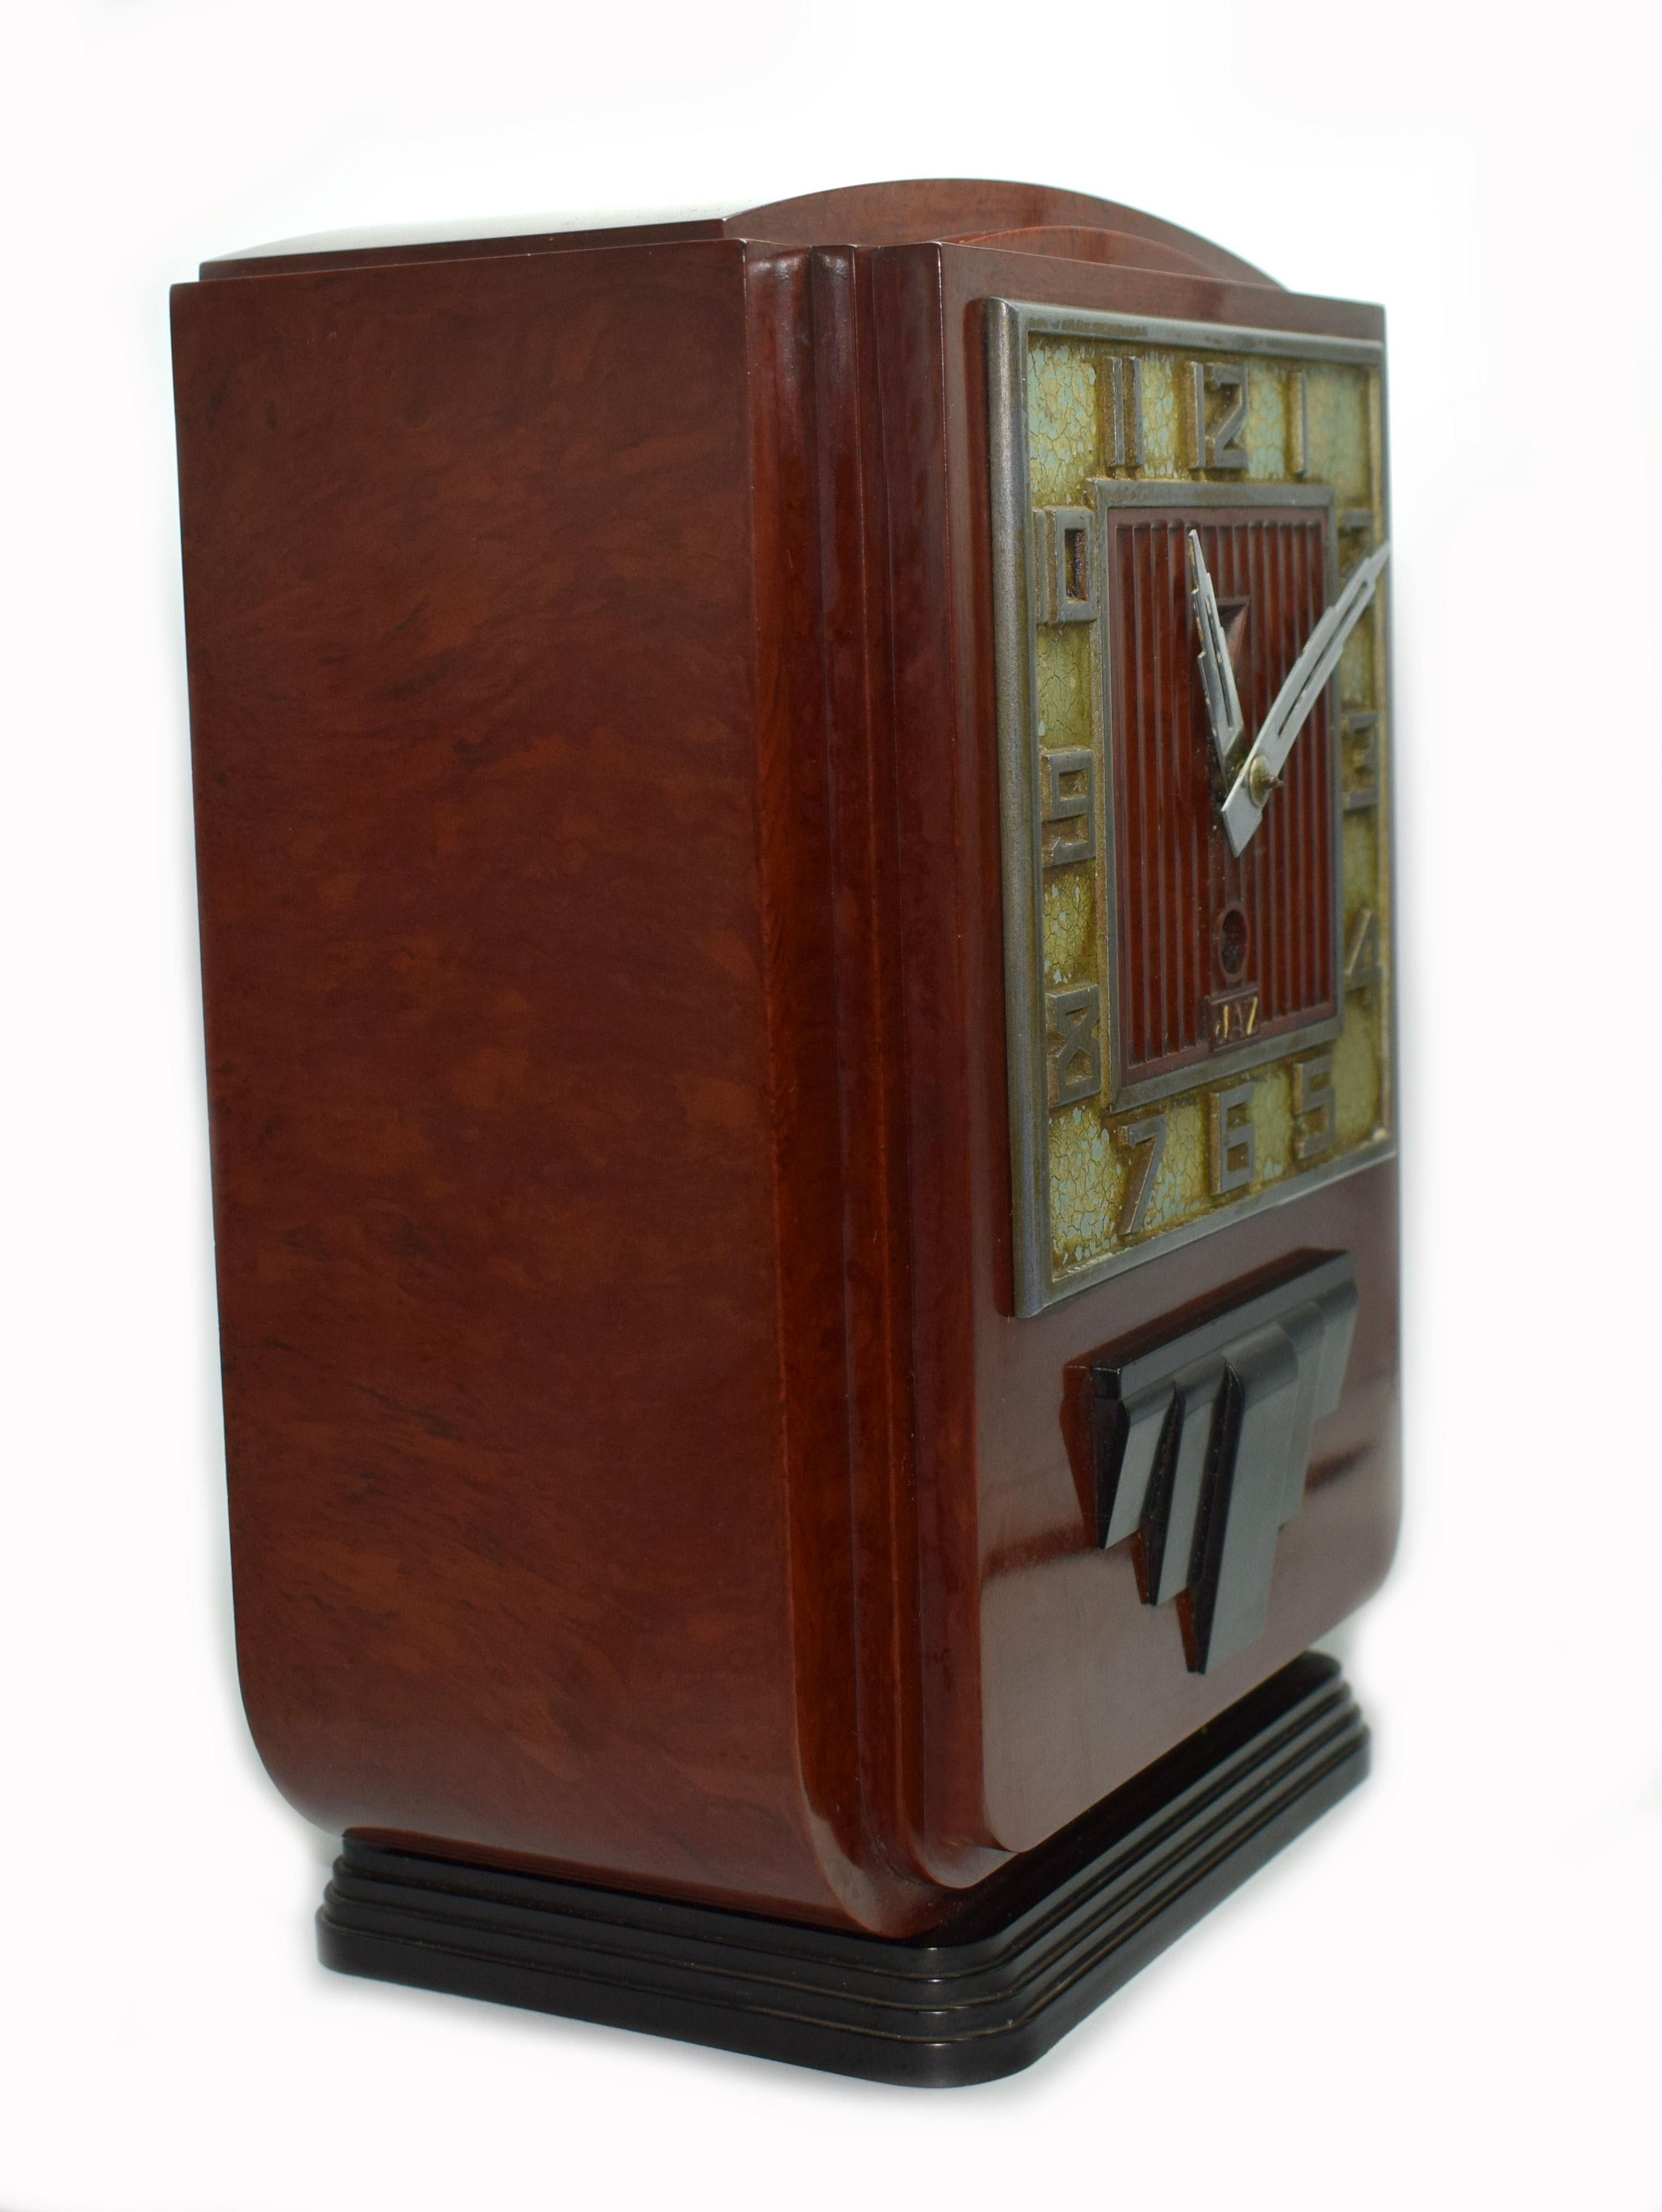 This is the daddy of true 1930s Art Deco clocks. Made in France by the very collectable JAZ company, this clock screams everything about the Deco era we all love and admire, streamline, Industrial and modernist. The casing is a red mottled color,